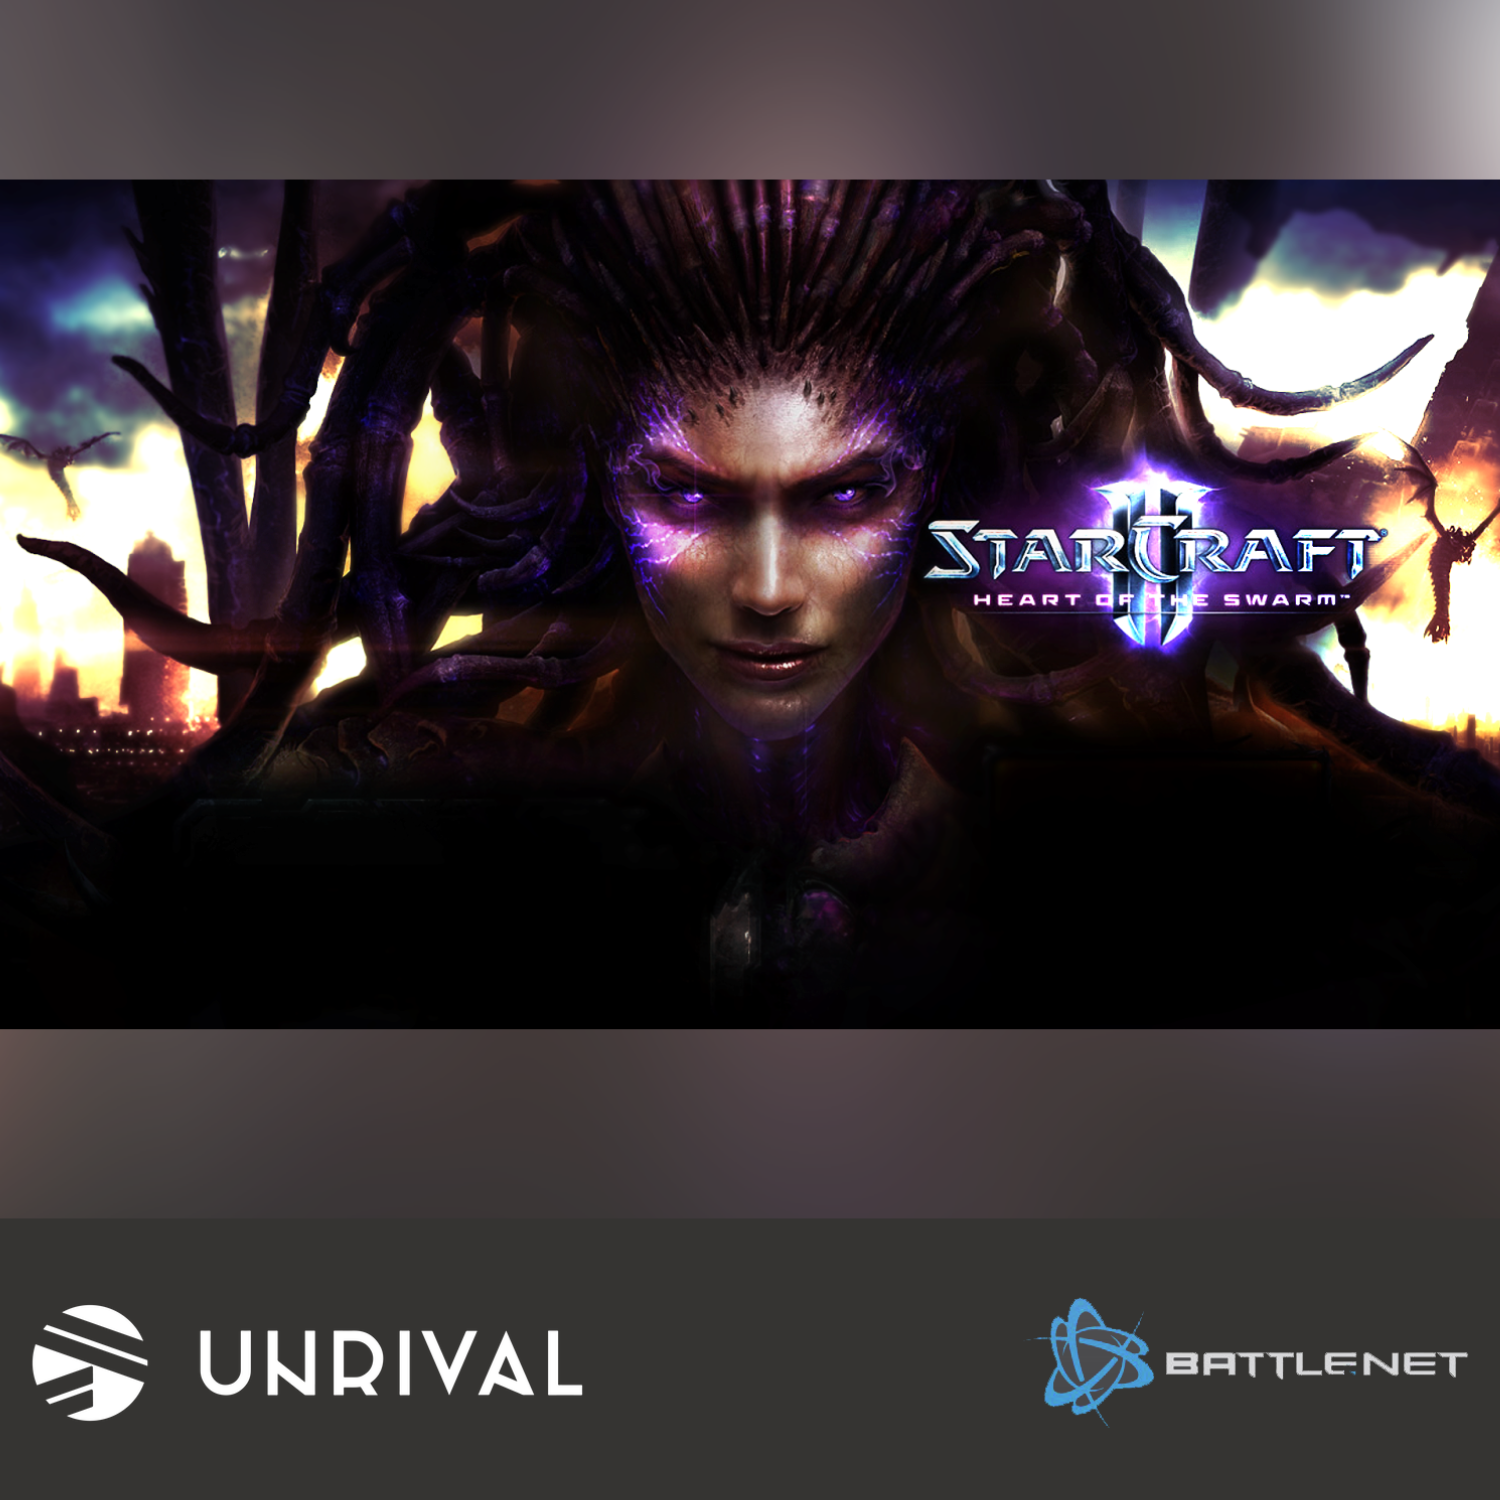 Starcraft II 2: Heart of the Swarm Digital Download Game - Unrival